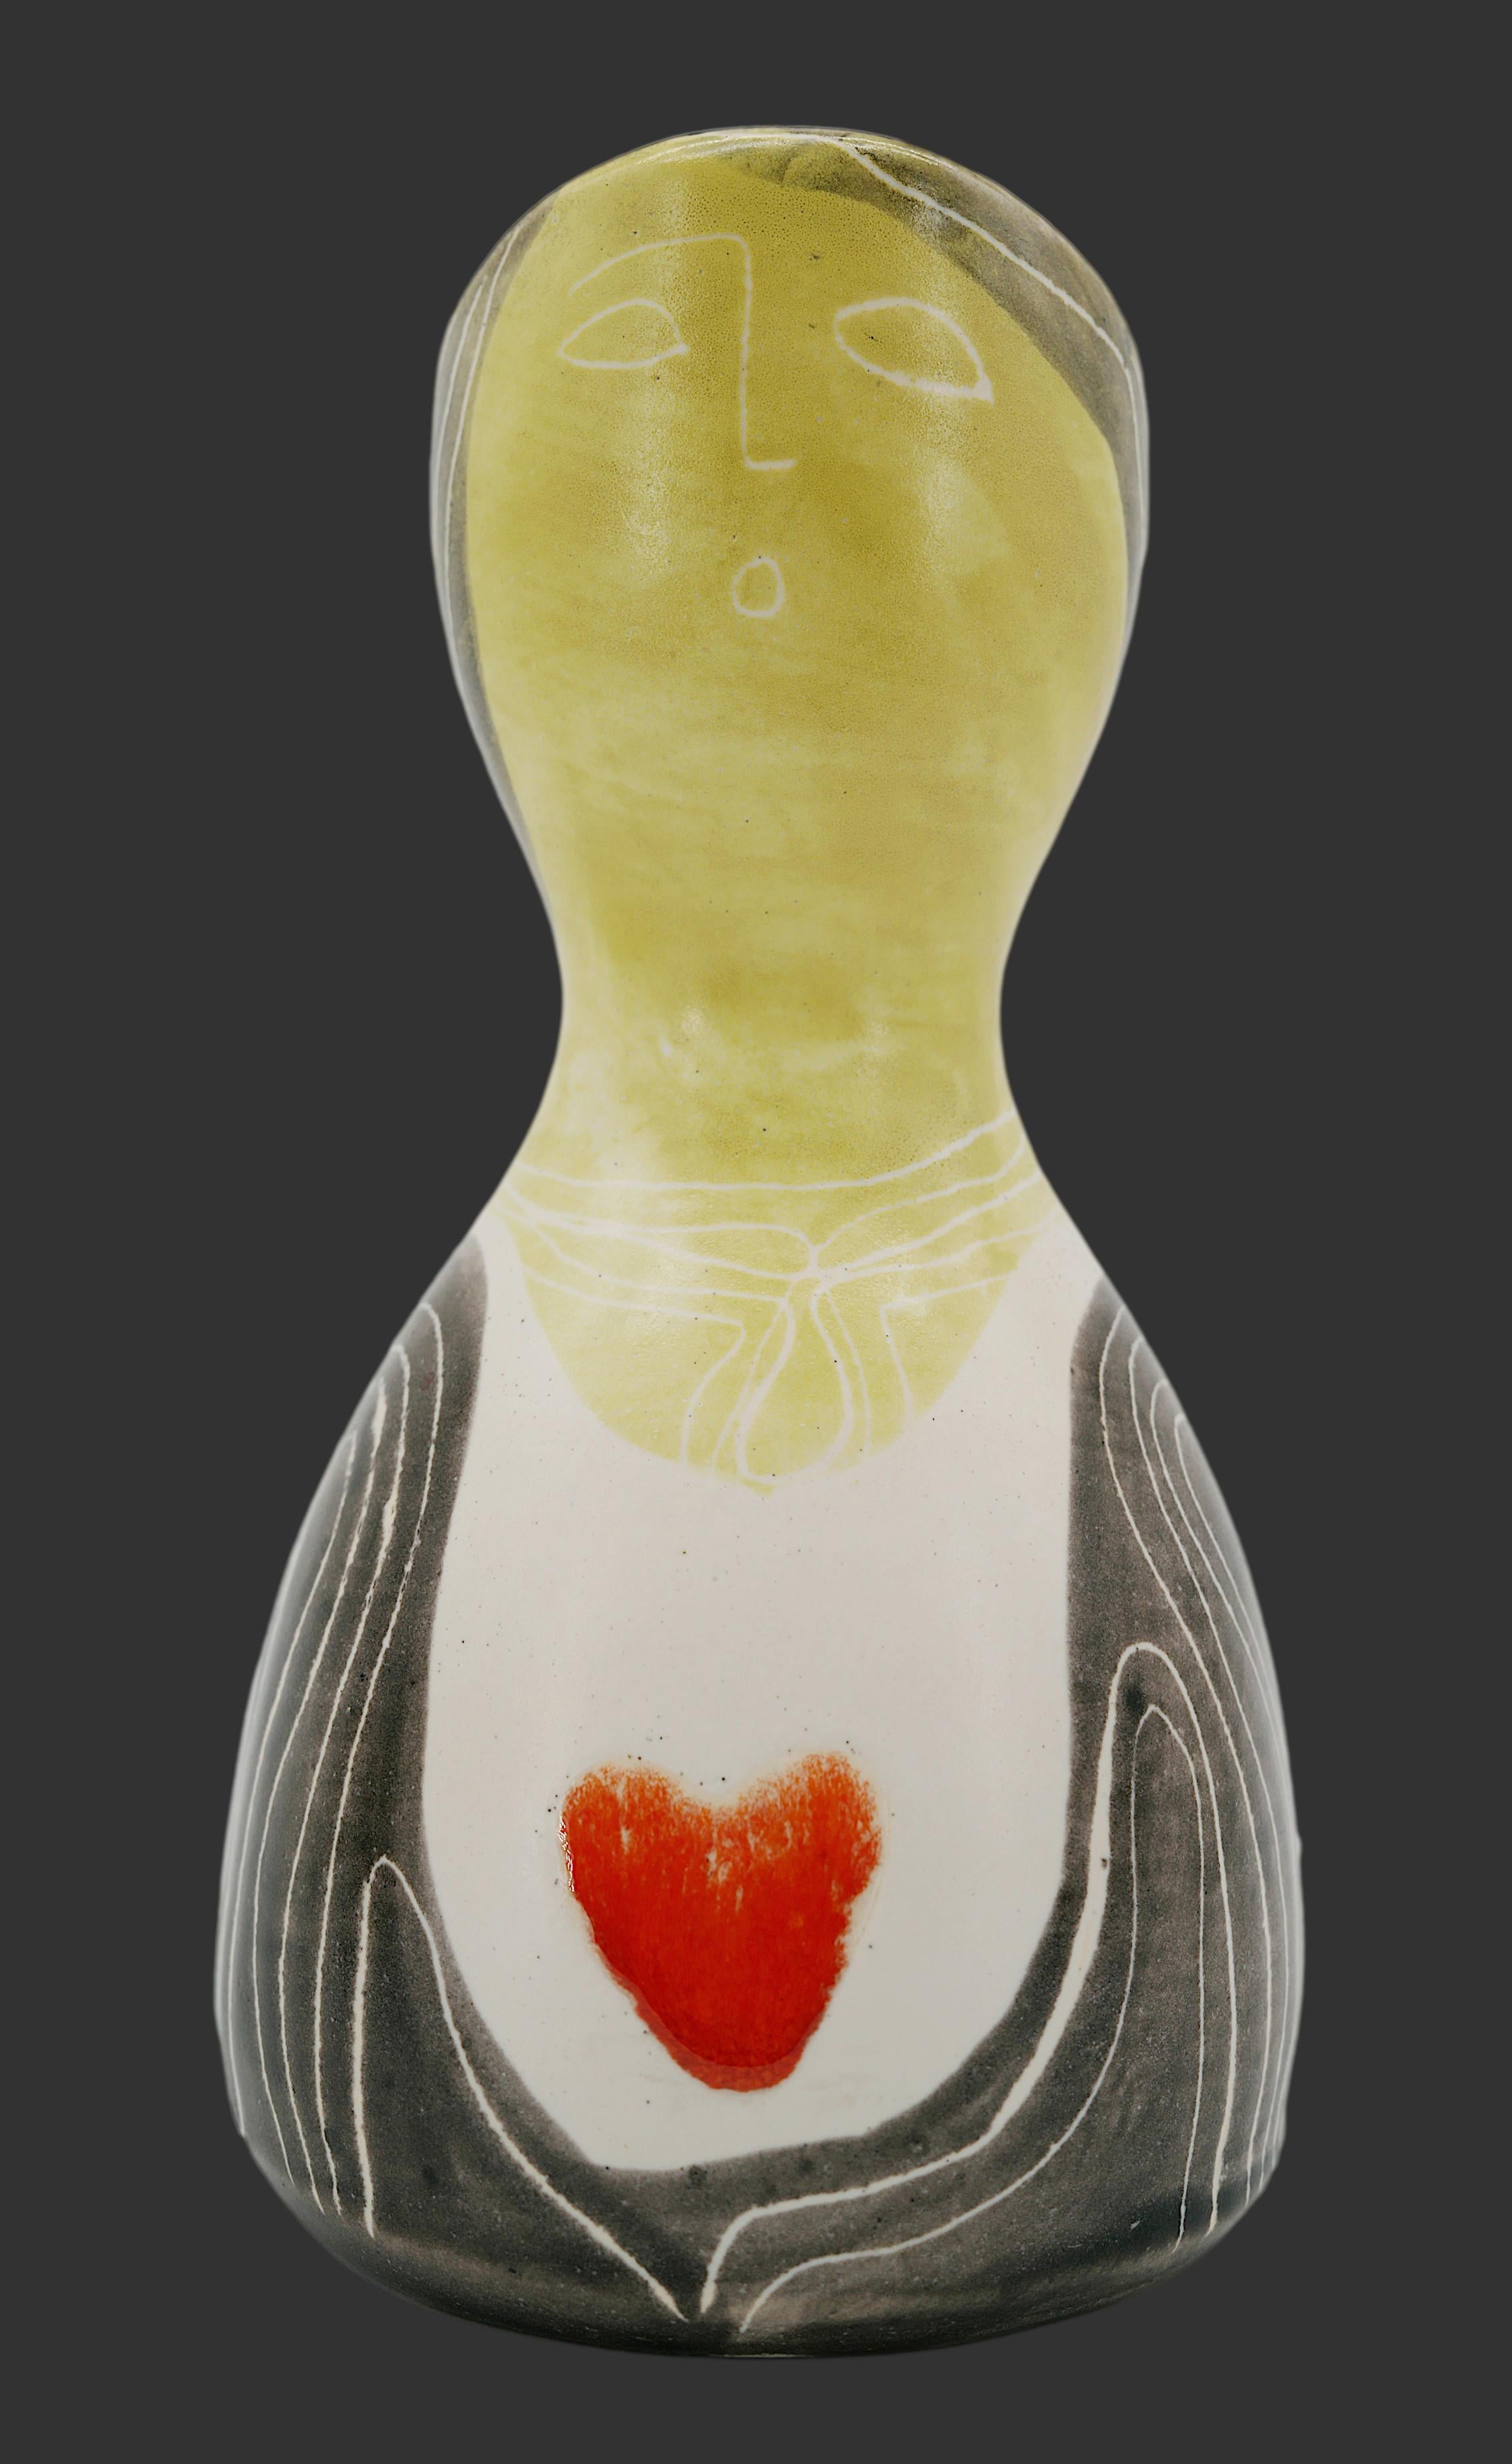 Anthropomorphic ceramic vase by Mado JOLAIN, France, 1950s. Stoneware vase very close to Picasso's production, in terms of colors and design. Height : 9.1